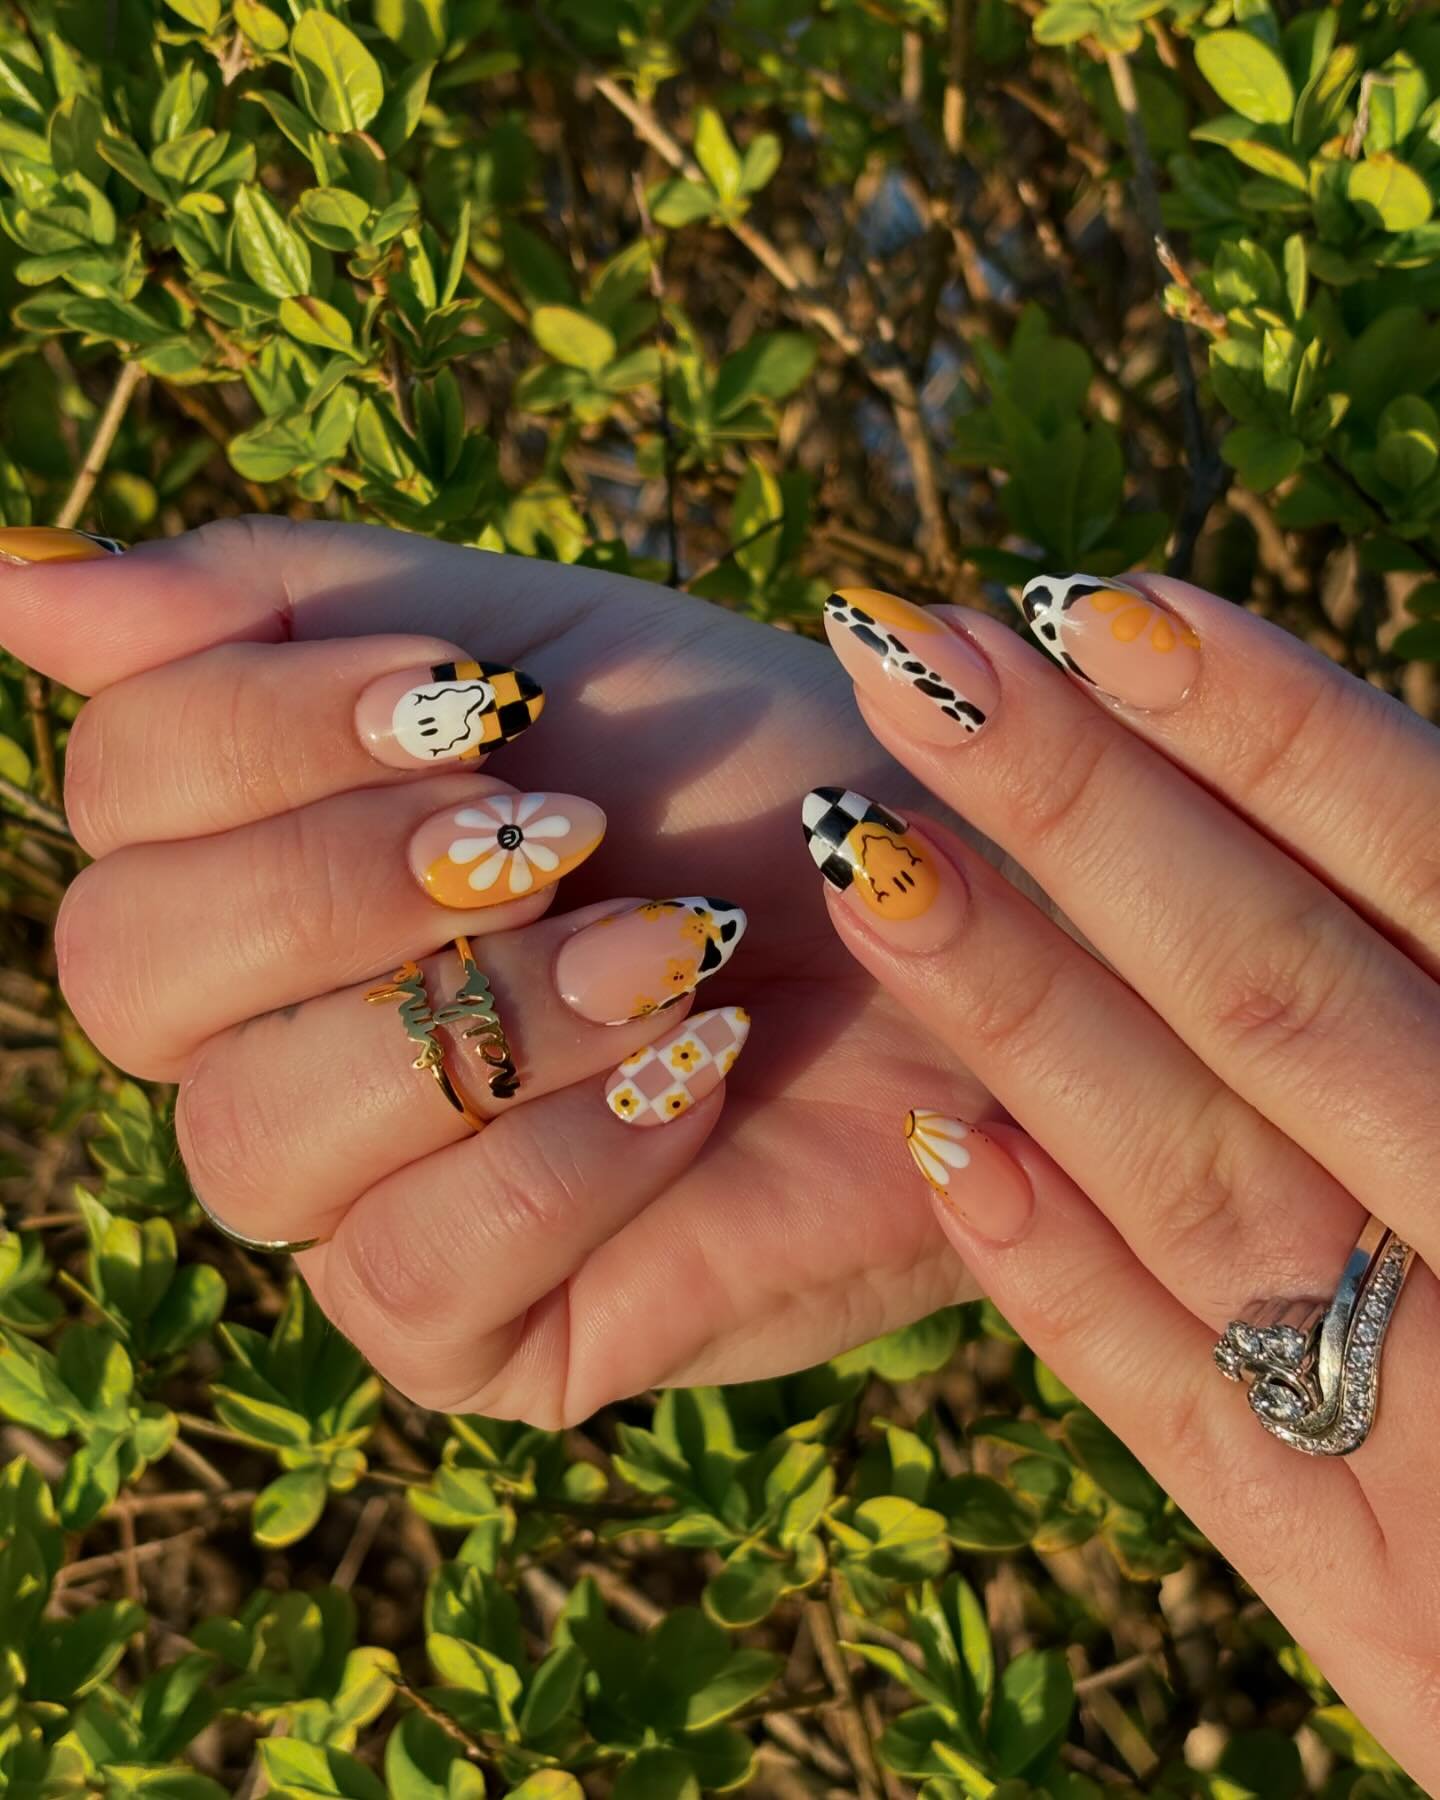 Our next giveaway is ready to roll! 🙃🙂

NAME THESE NAILS! (By @smbnails_ )

HOW TO ENTER:
1. Make sure your following @stellaandshay 
2. Tag someone who would love these nails
3. Like this photo, and 2 others of your choice!
4. Think of a Clever na